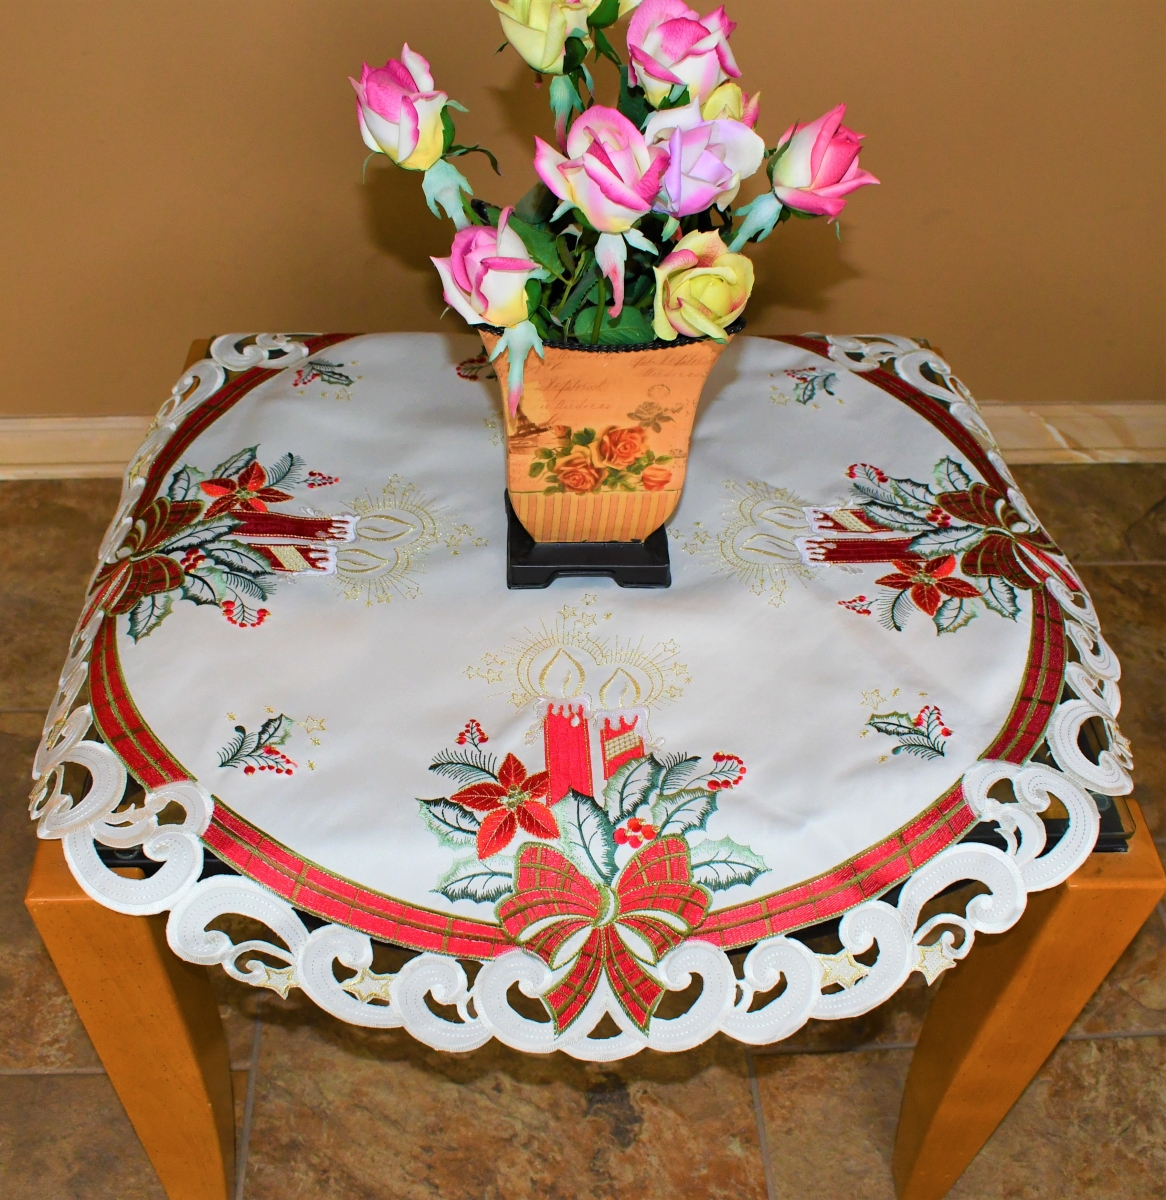 Picture of Sinobrite H0013-34x34RD 34 x 34 in. Plaid Bows with Candles Round Table Topper